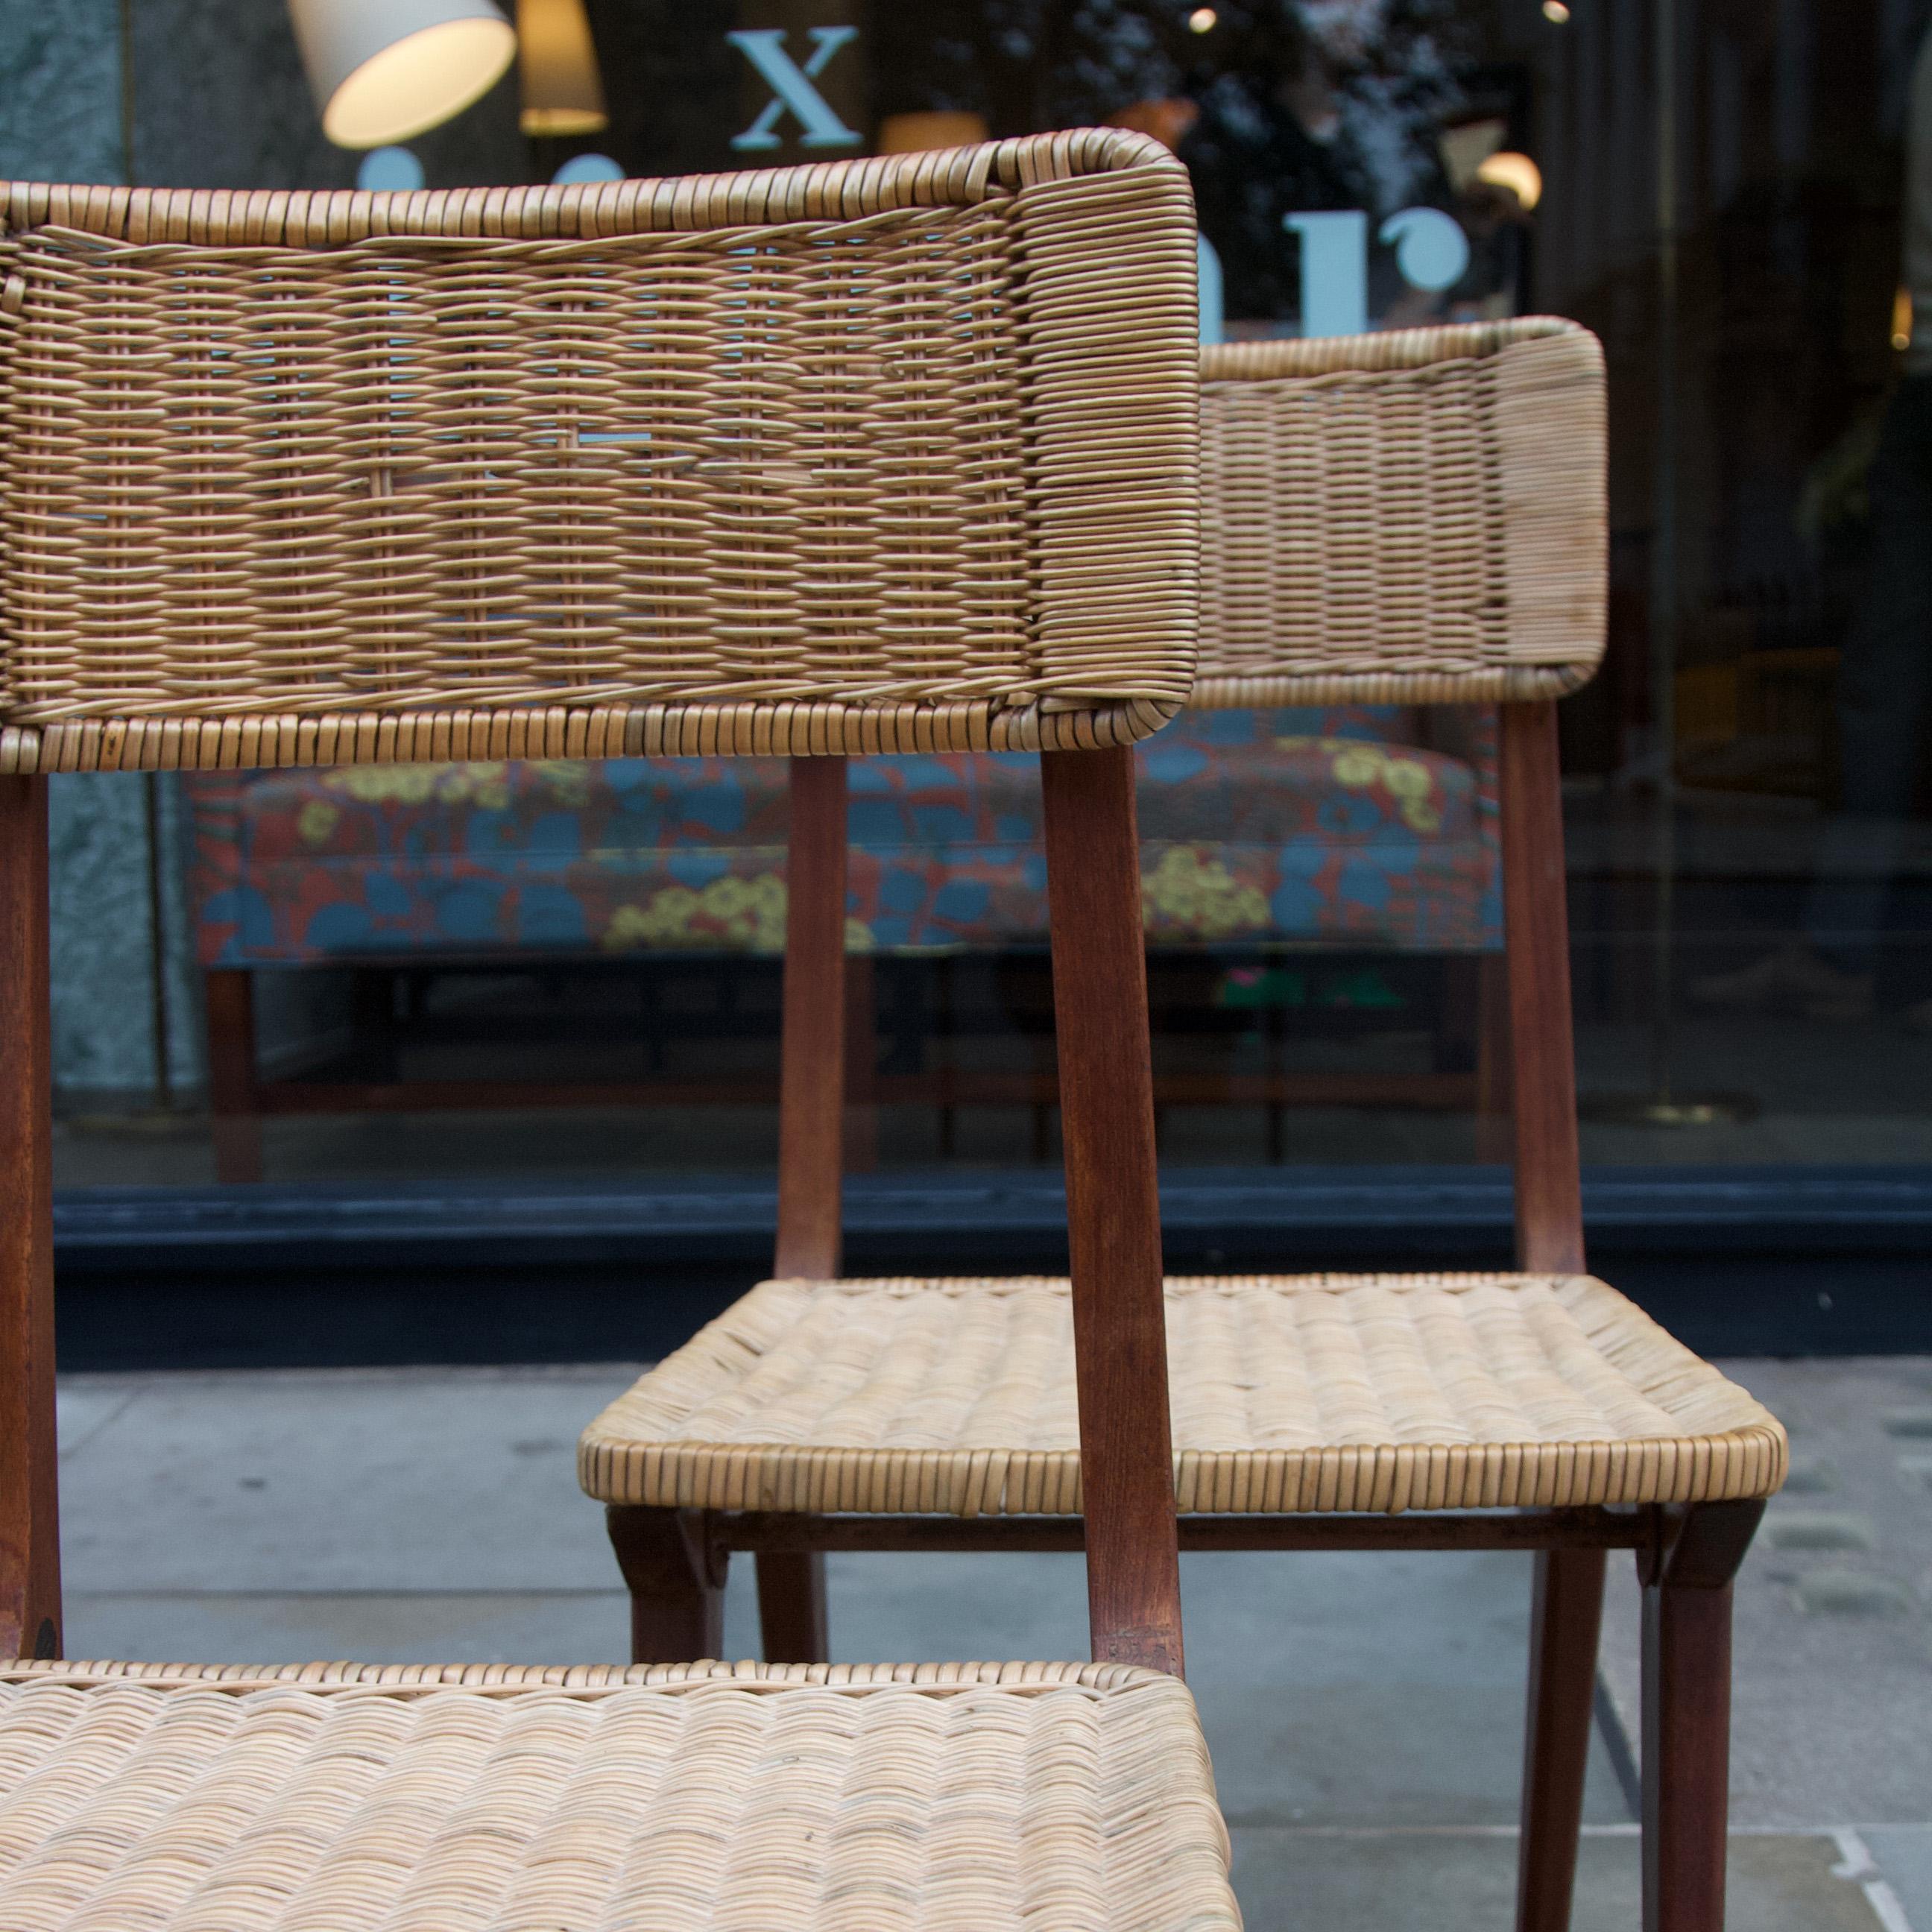 Pair of Teak and Wicker Chairs, French, 1950s 1